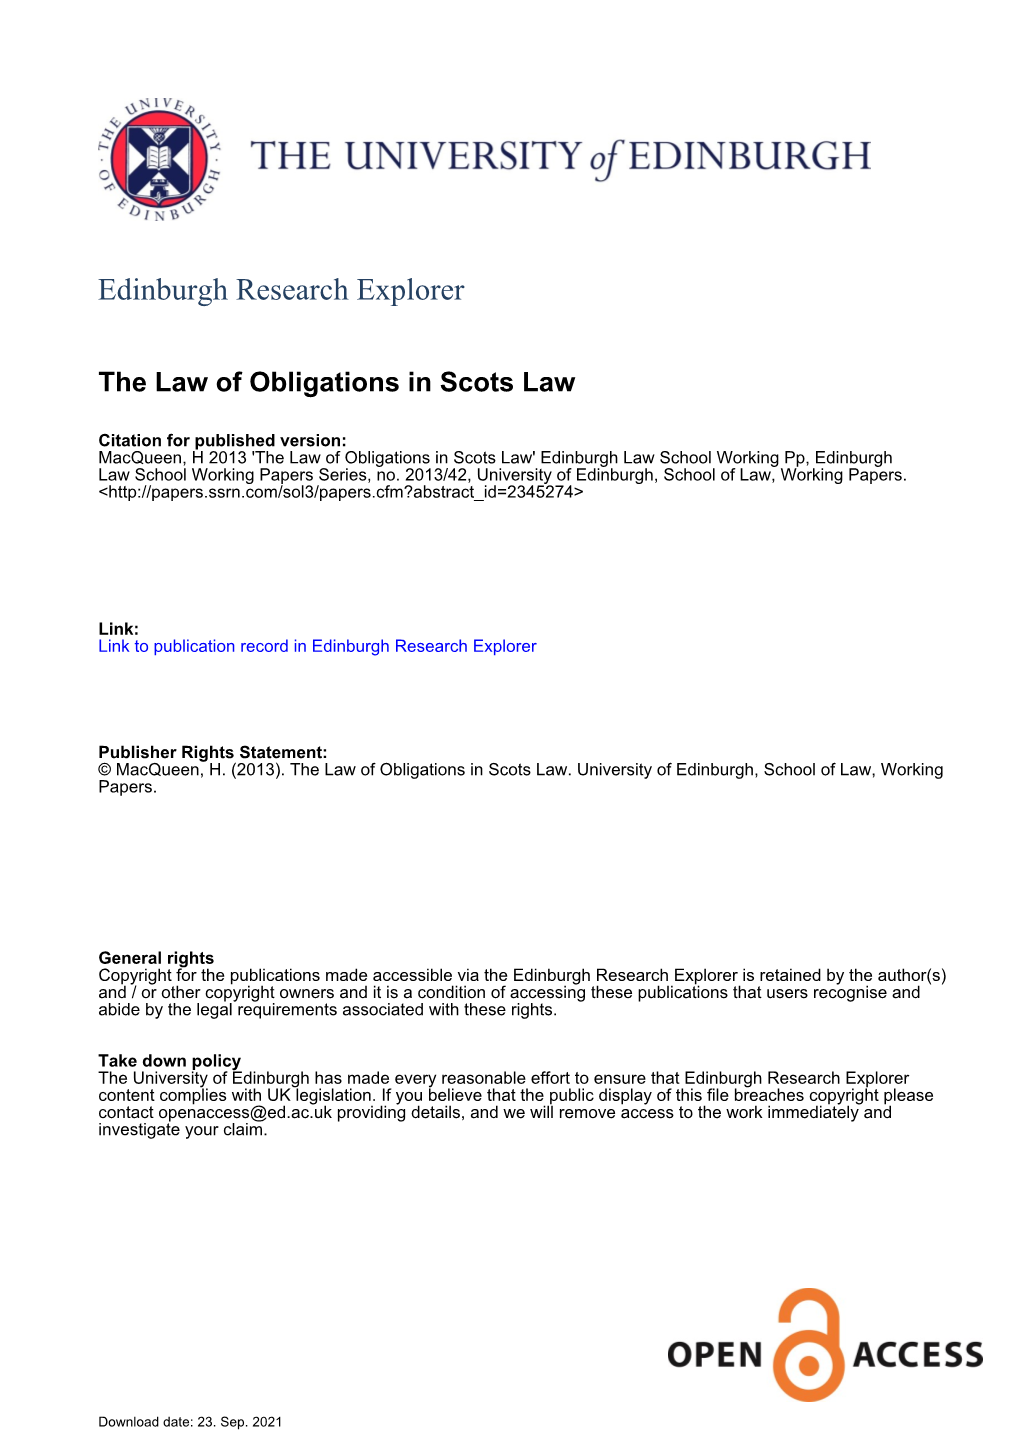 The Law of Obligations in Scots Law